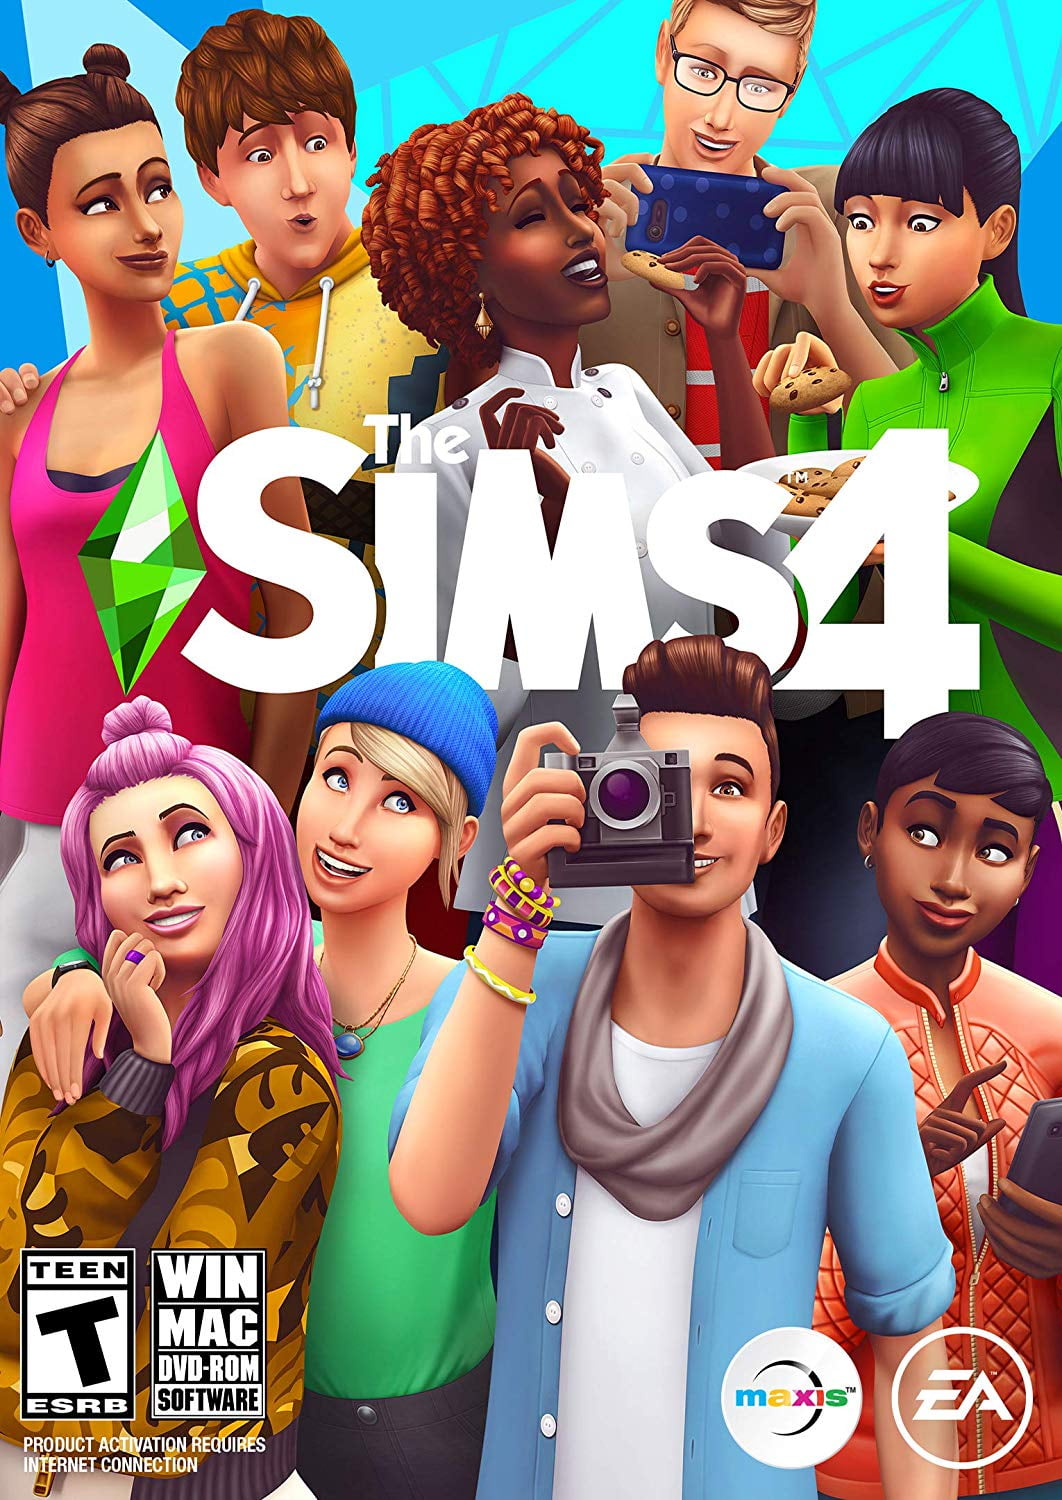 EA is giving away The Sims 4 for free on Mac for a limited time